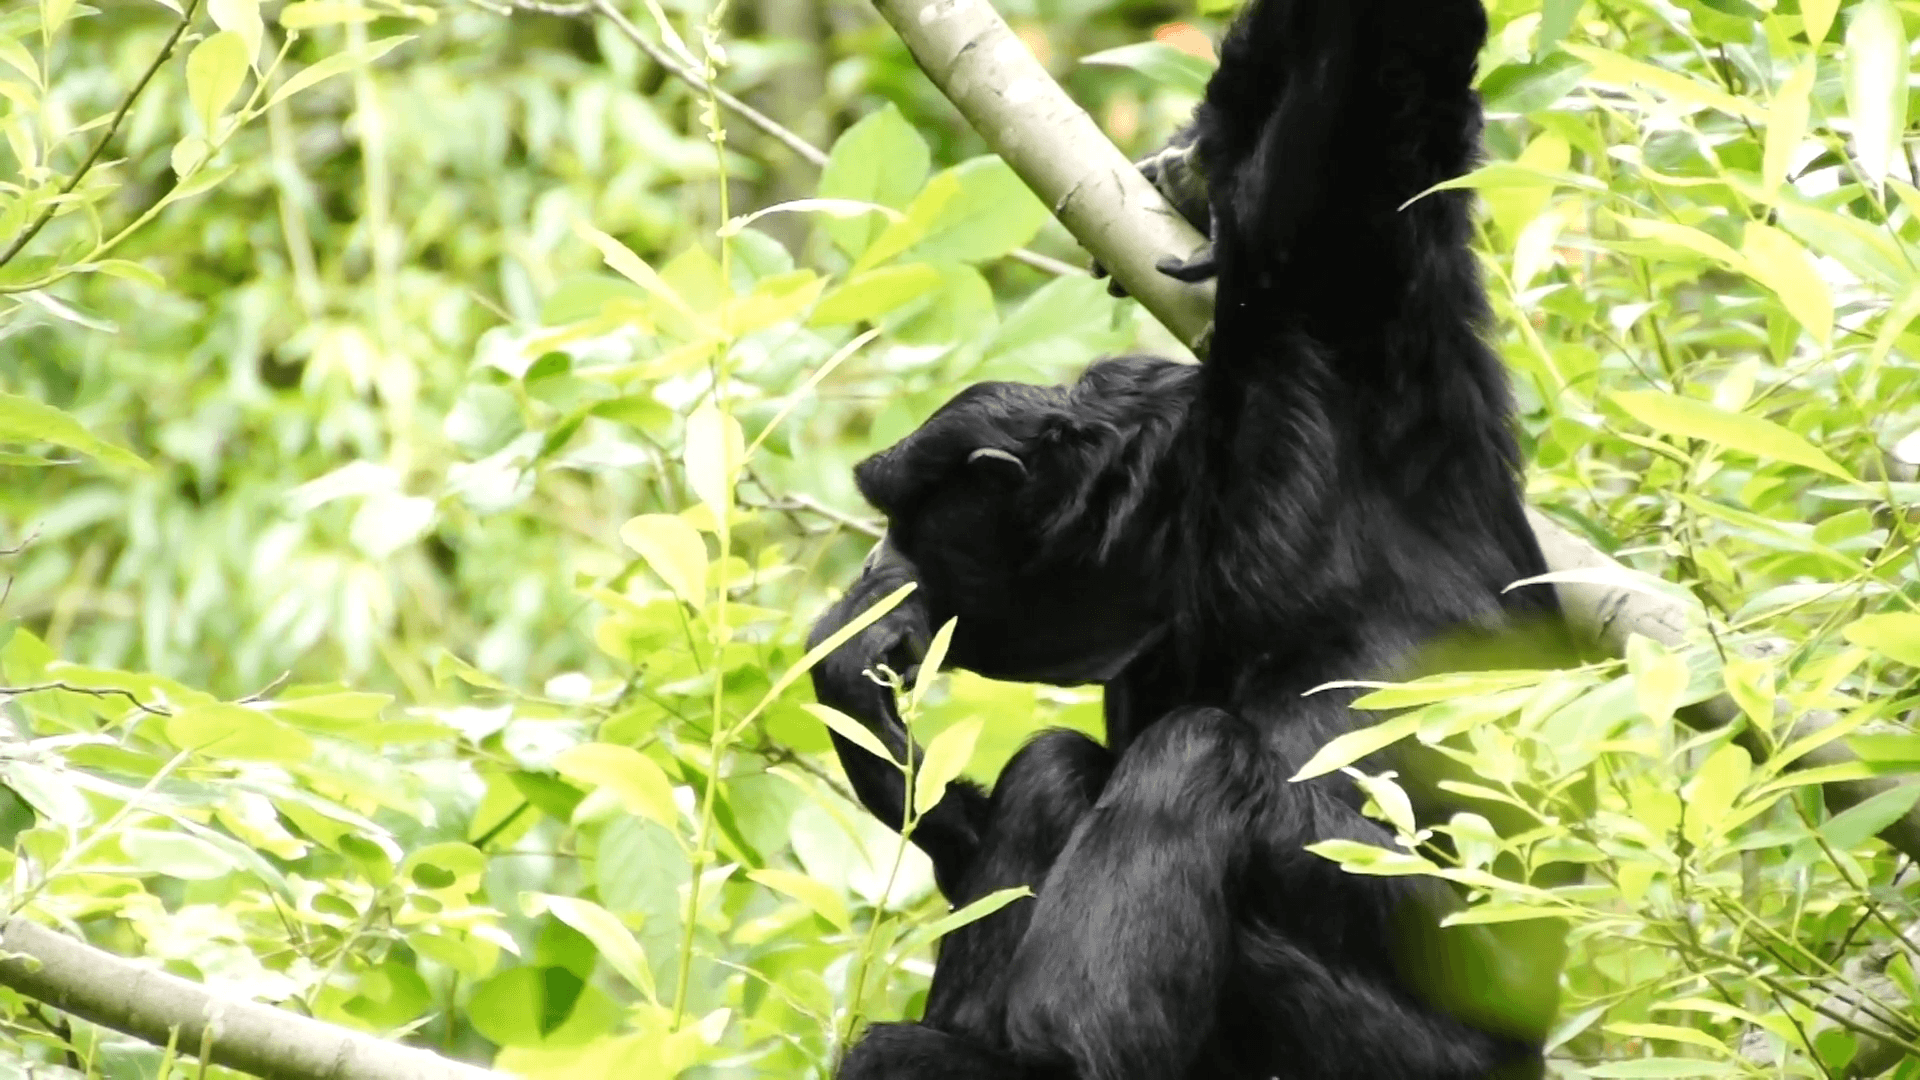 Siamang ( Hylobates syndactylus ) picks leaves for lunch; arboreal